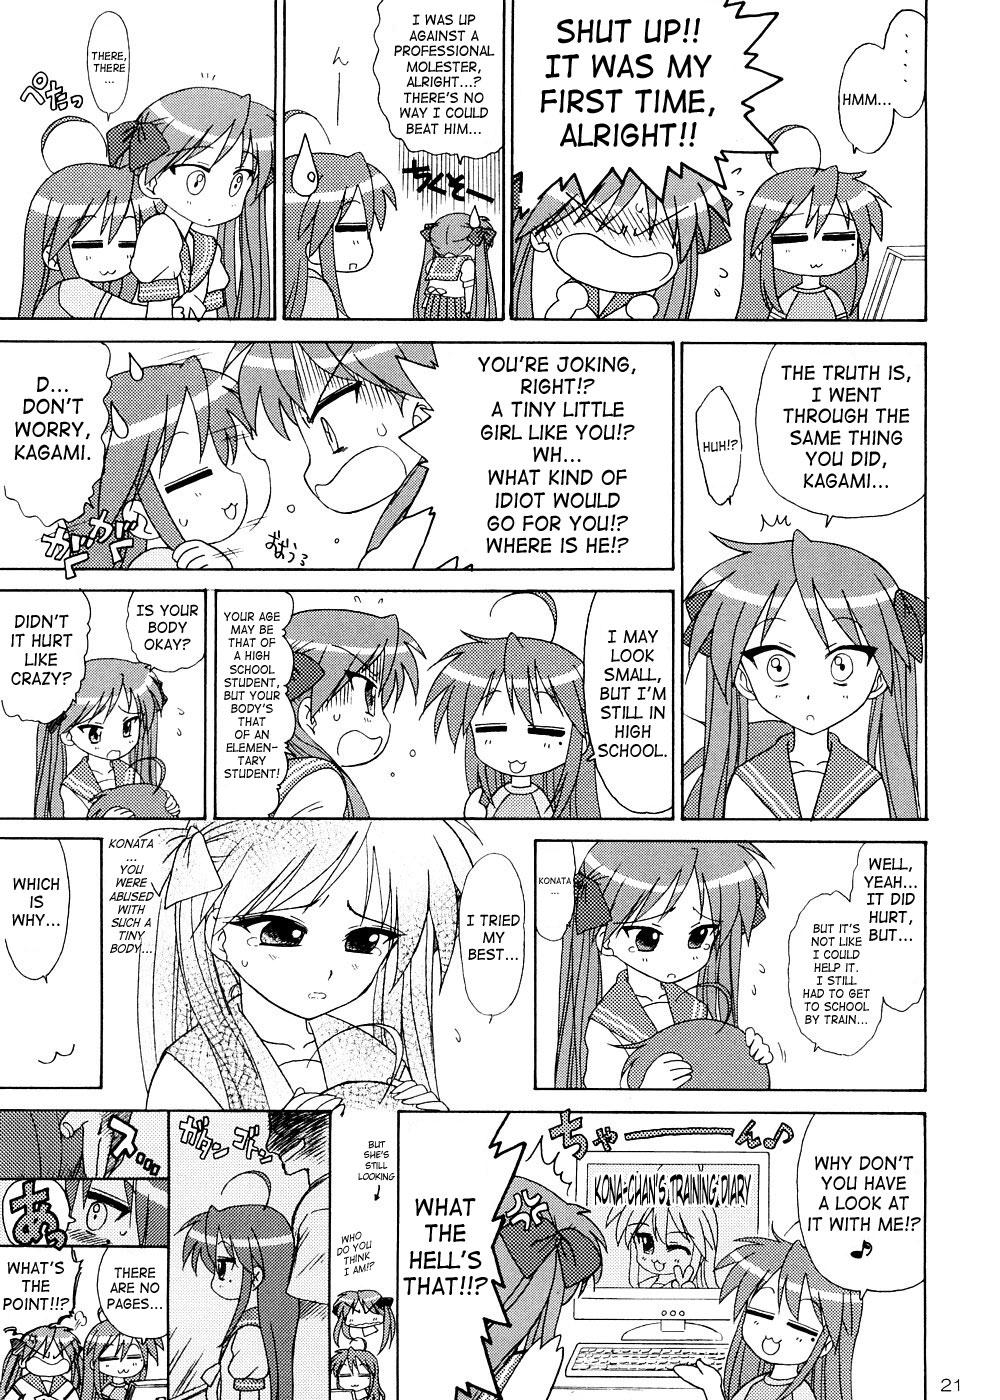 Roleplay Man in the Mirror - Lucky star Girlongirl - Page 20